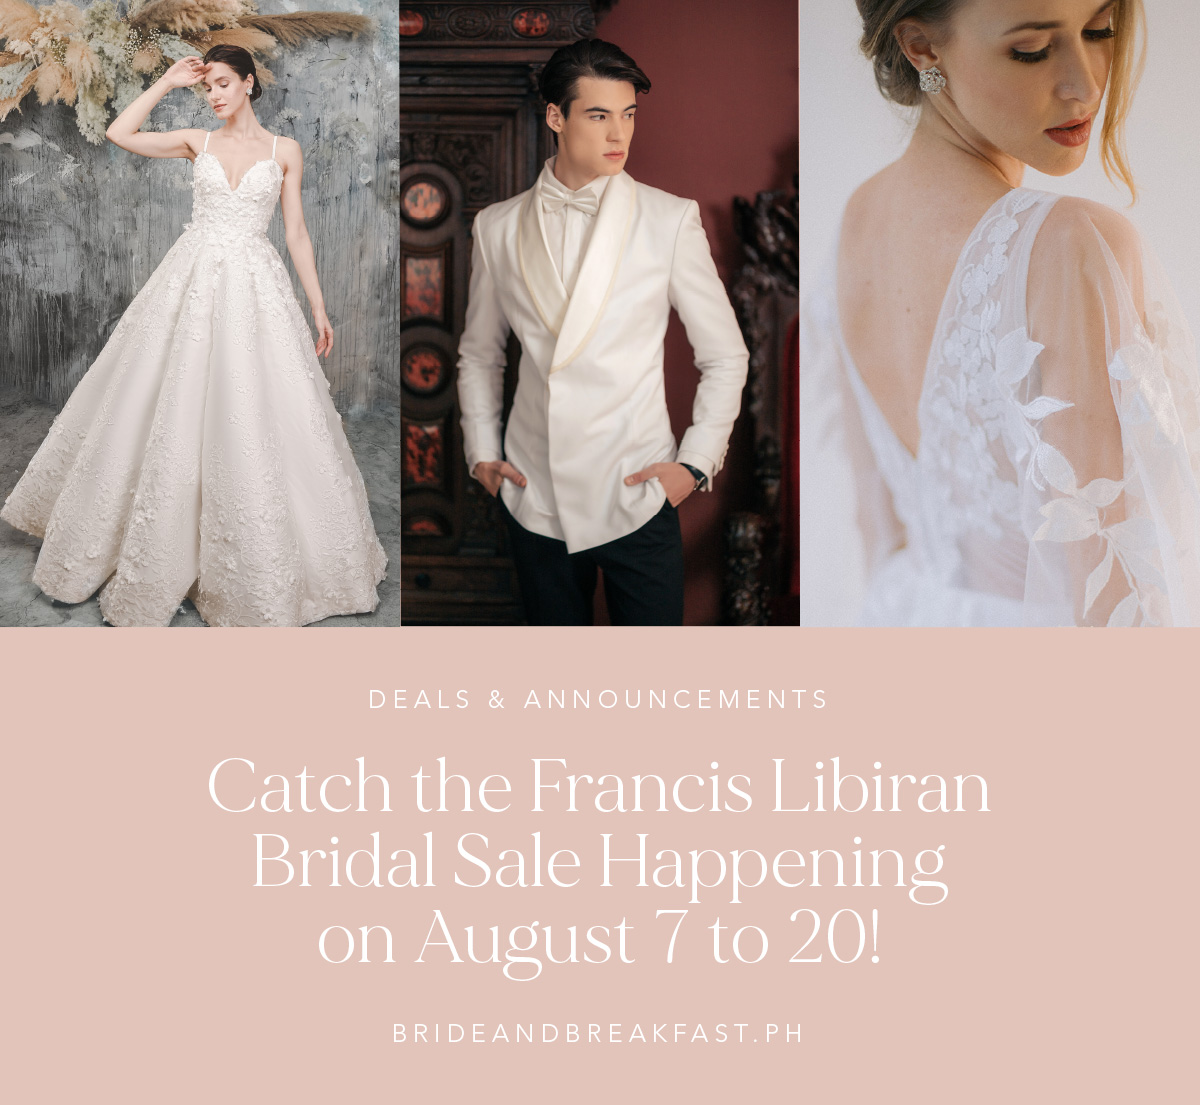 Catch the Francis Libiran Bridal Sale Happening on August 7 to 20!